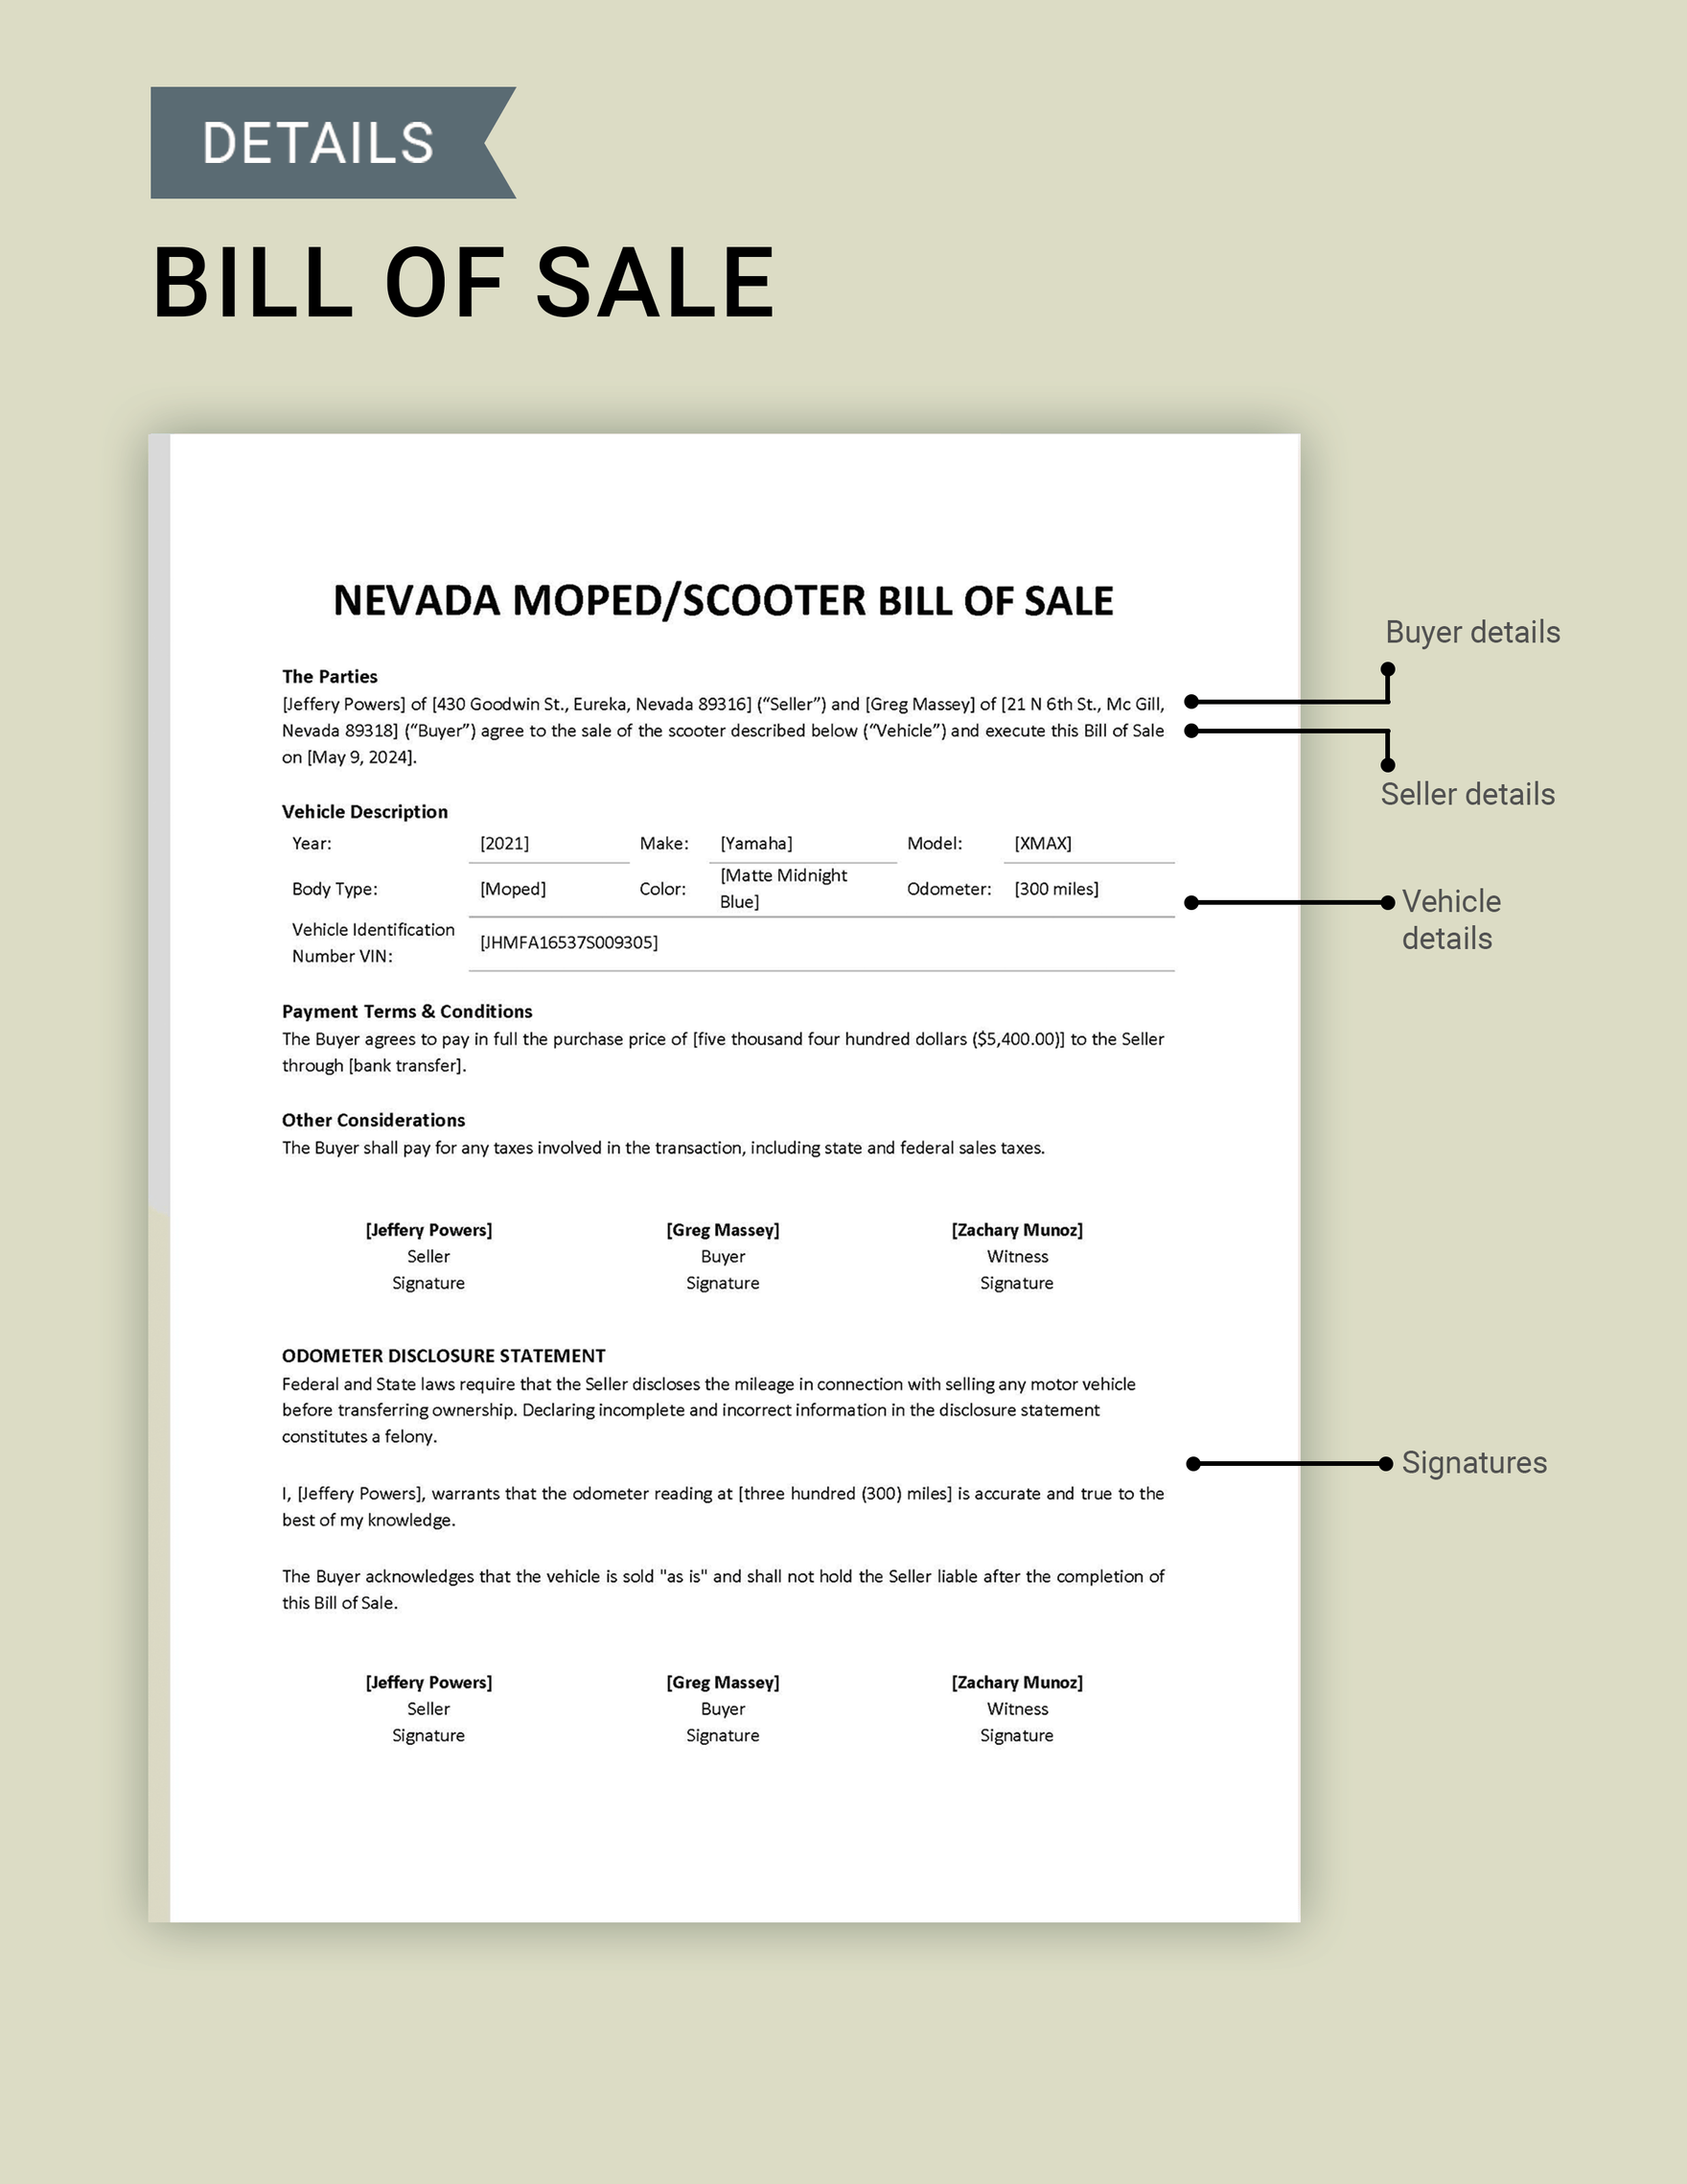 Nevada Moped / Scooter Bill of Sale Template